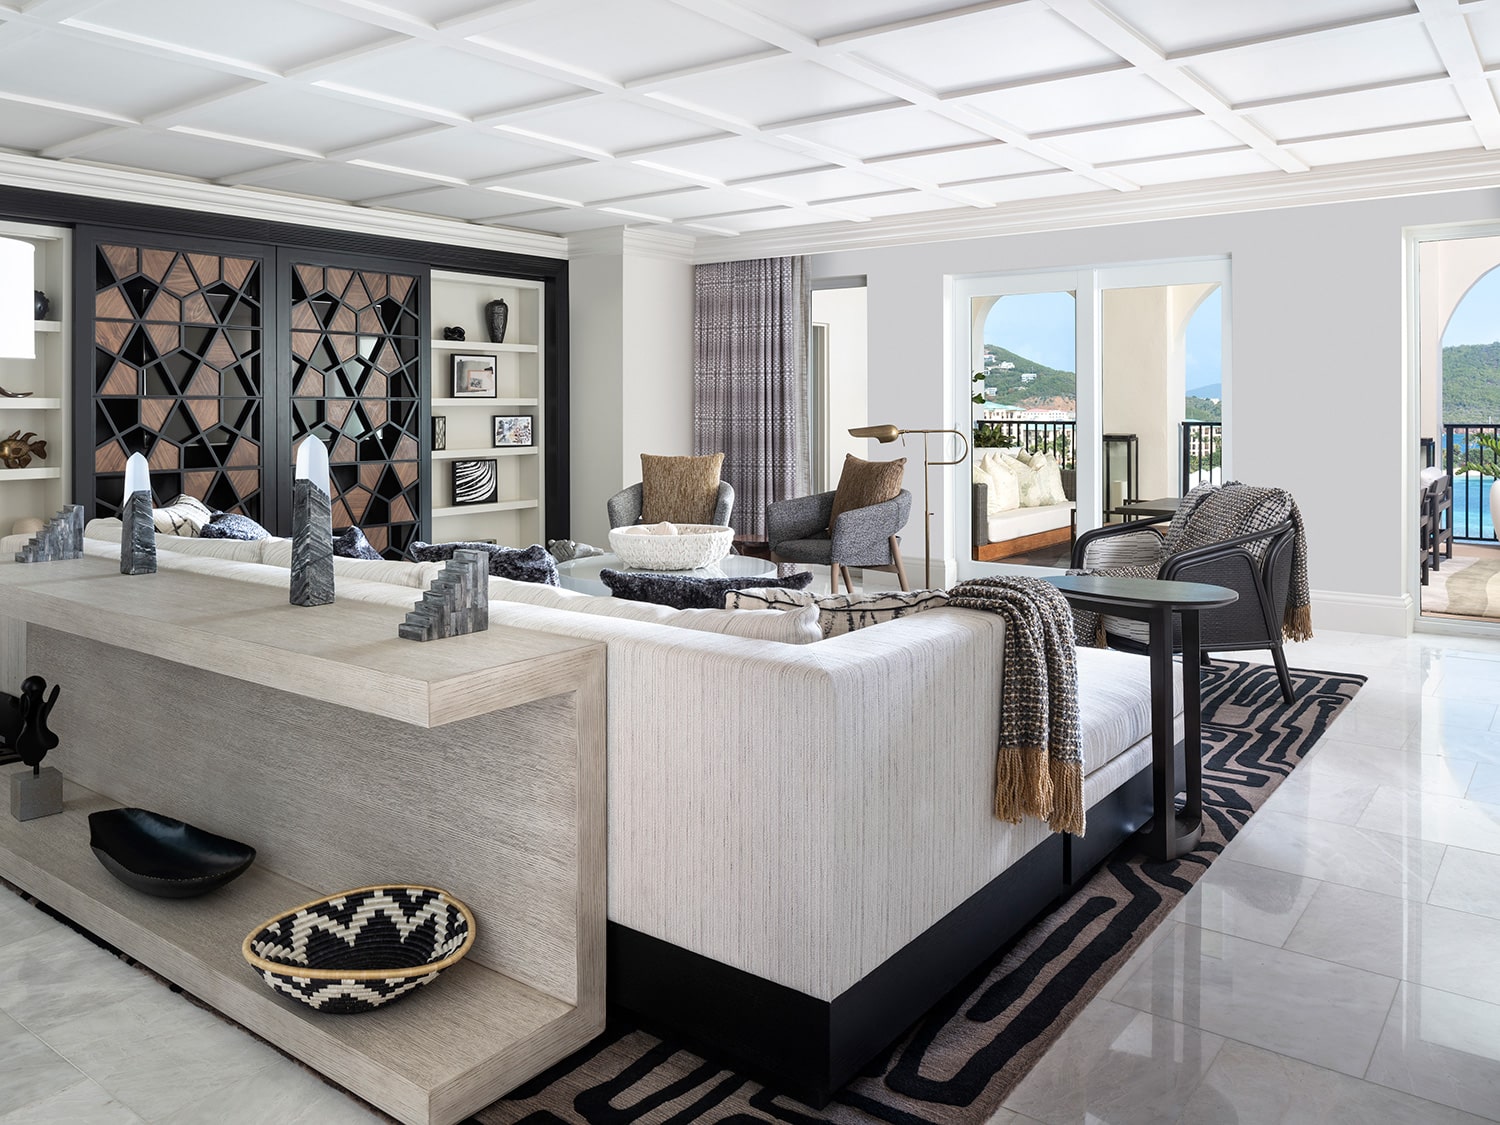 The interior living space of the Presidential Suite at the Ritz-Carlton, St. Thomas, in the U.S. Virgin Islands.